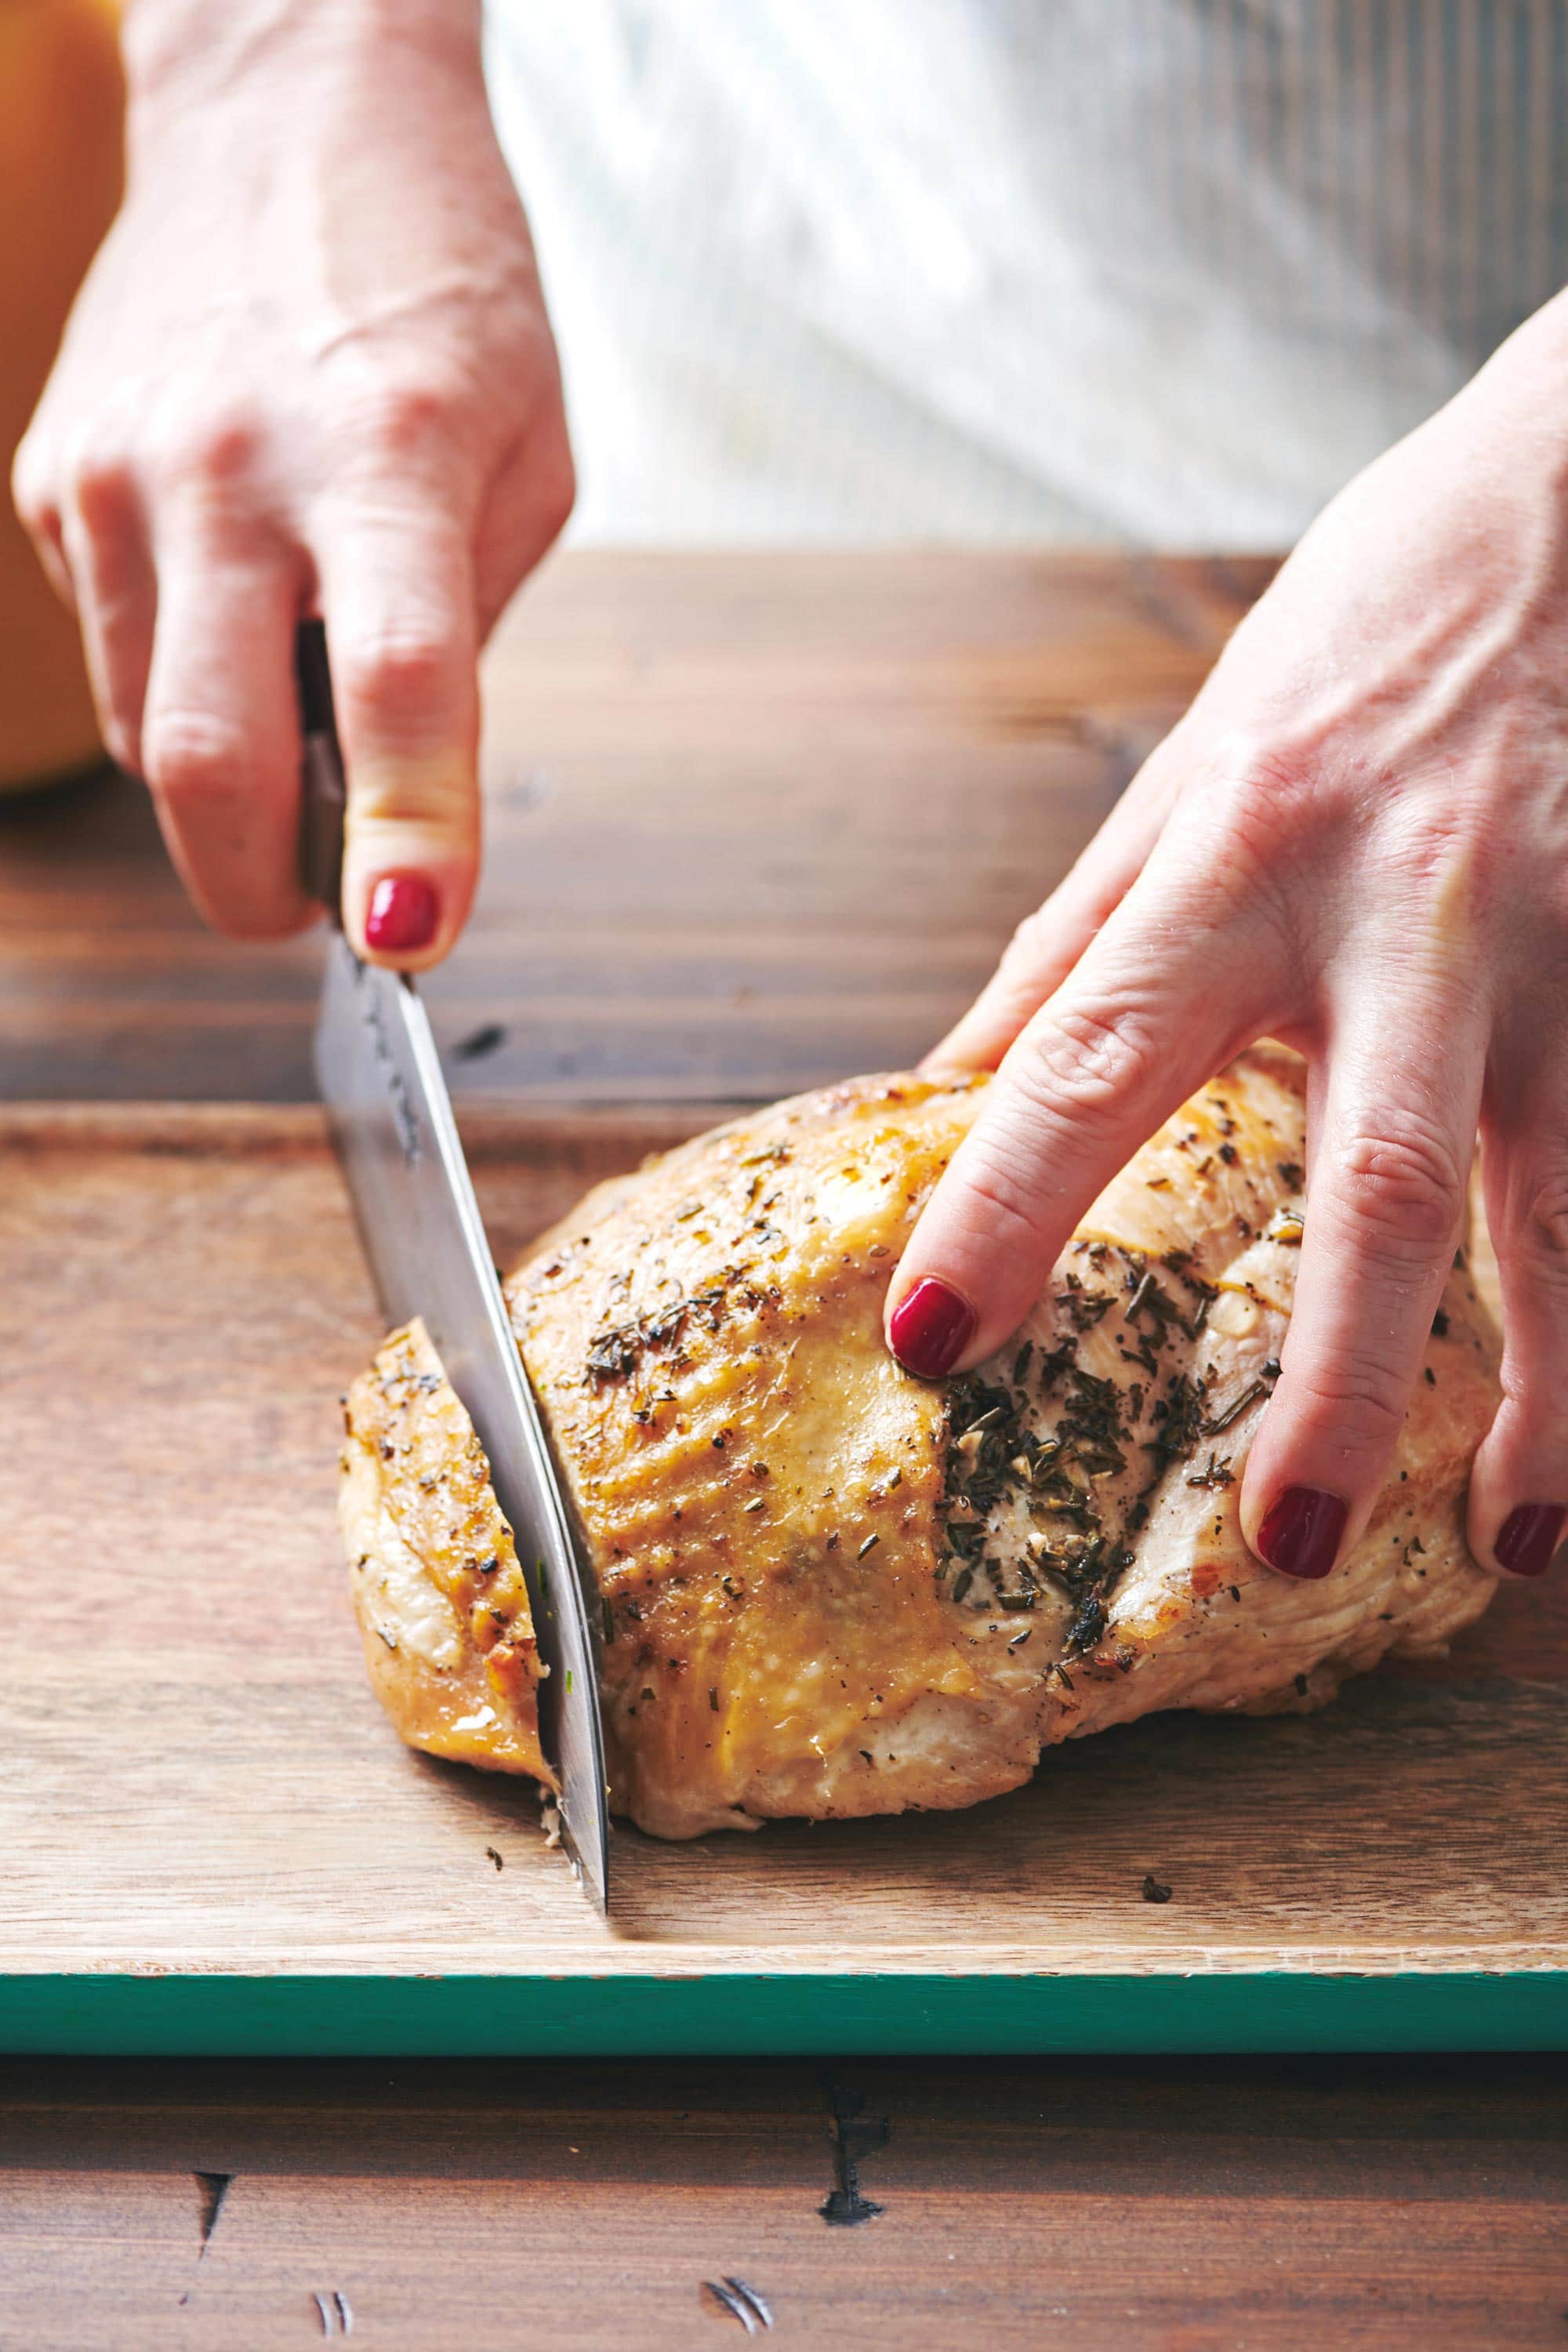 Woman slicing a Turkey Breast with a knife on a wooden surface.